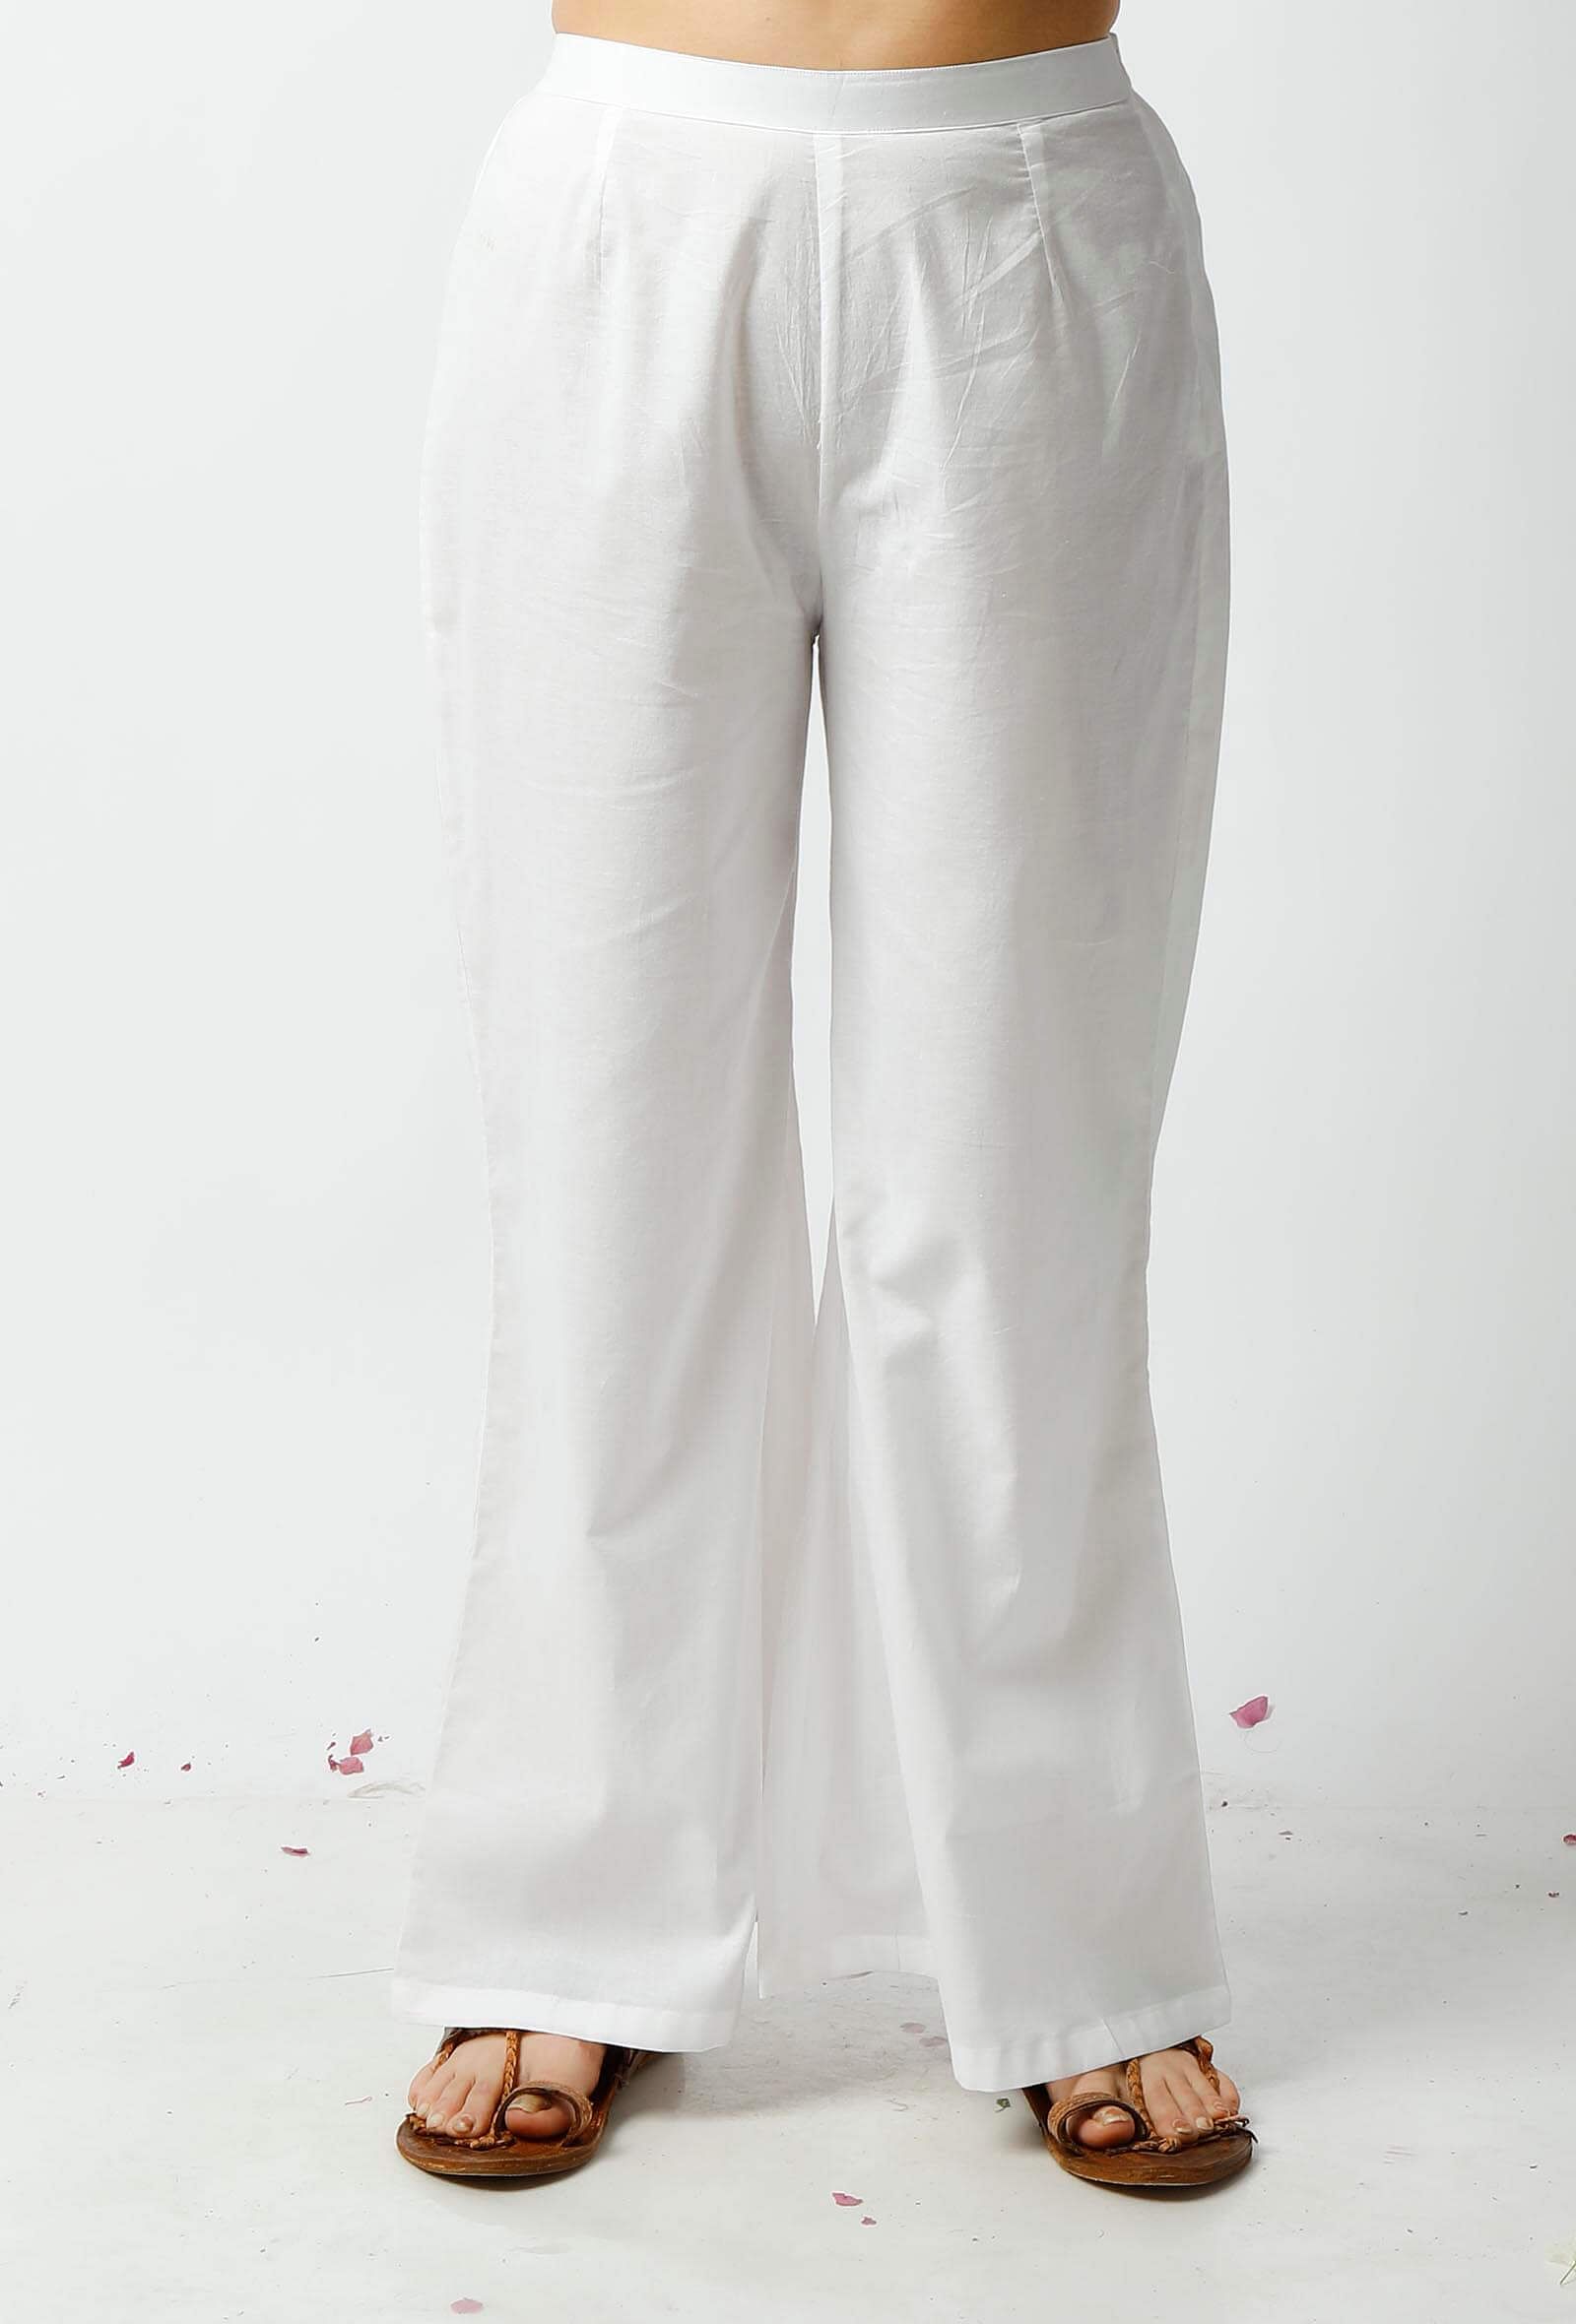 Buy White Color Women Palazzo Pants Online in India